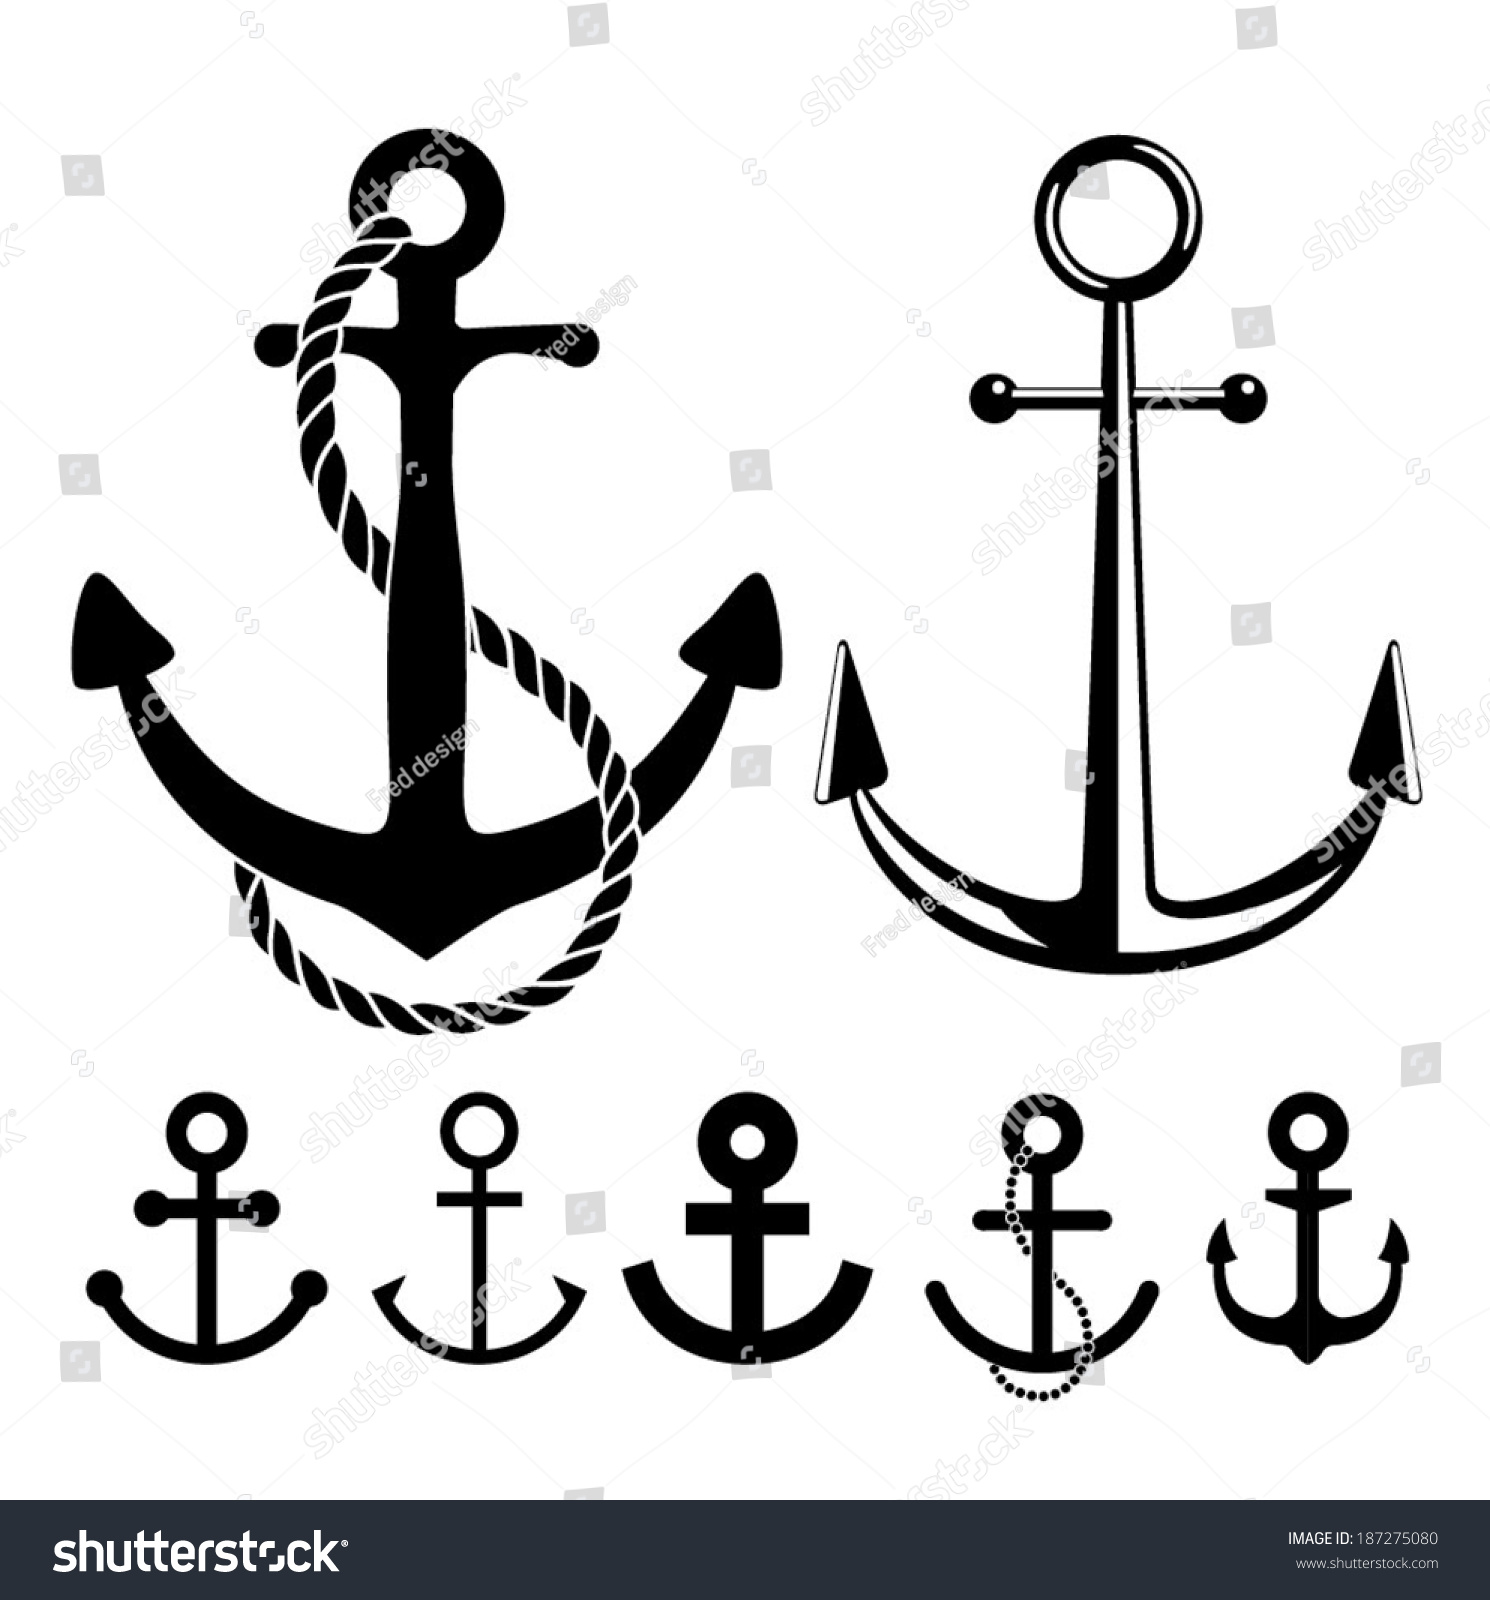 SVG of Set of anchor icons. Vector illustration. svg